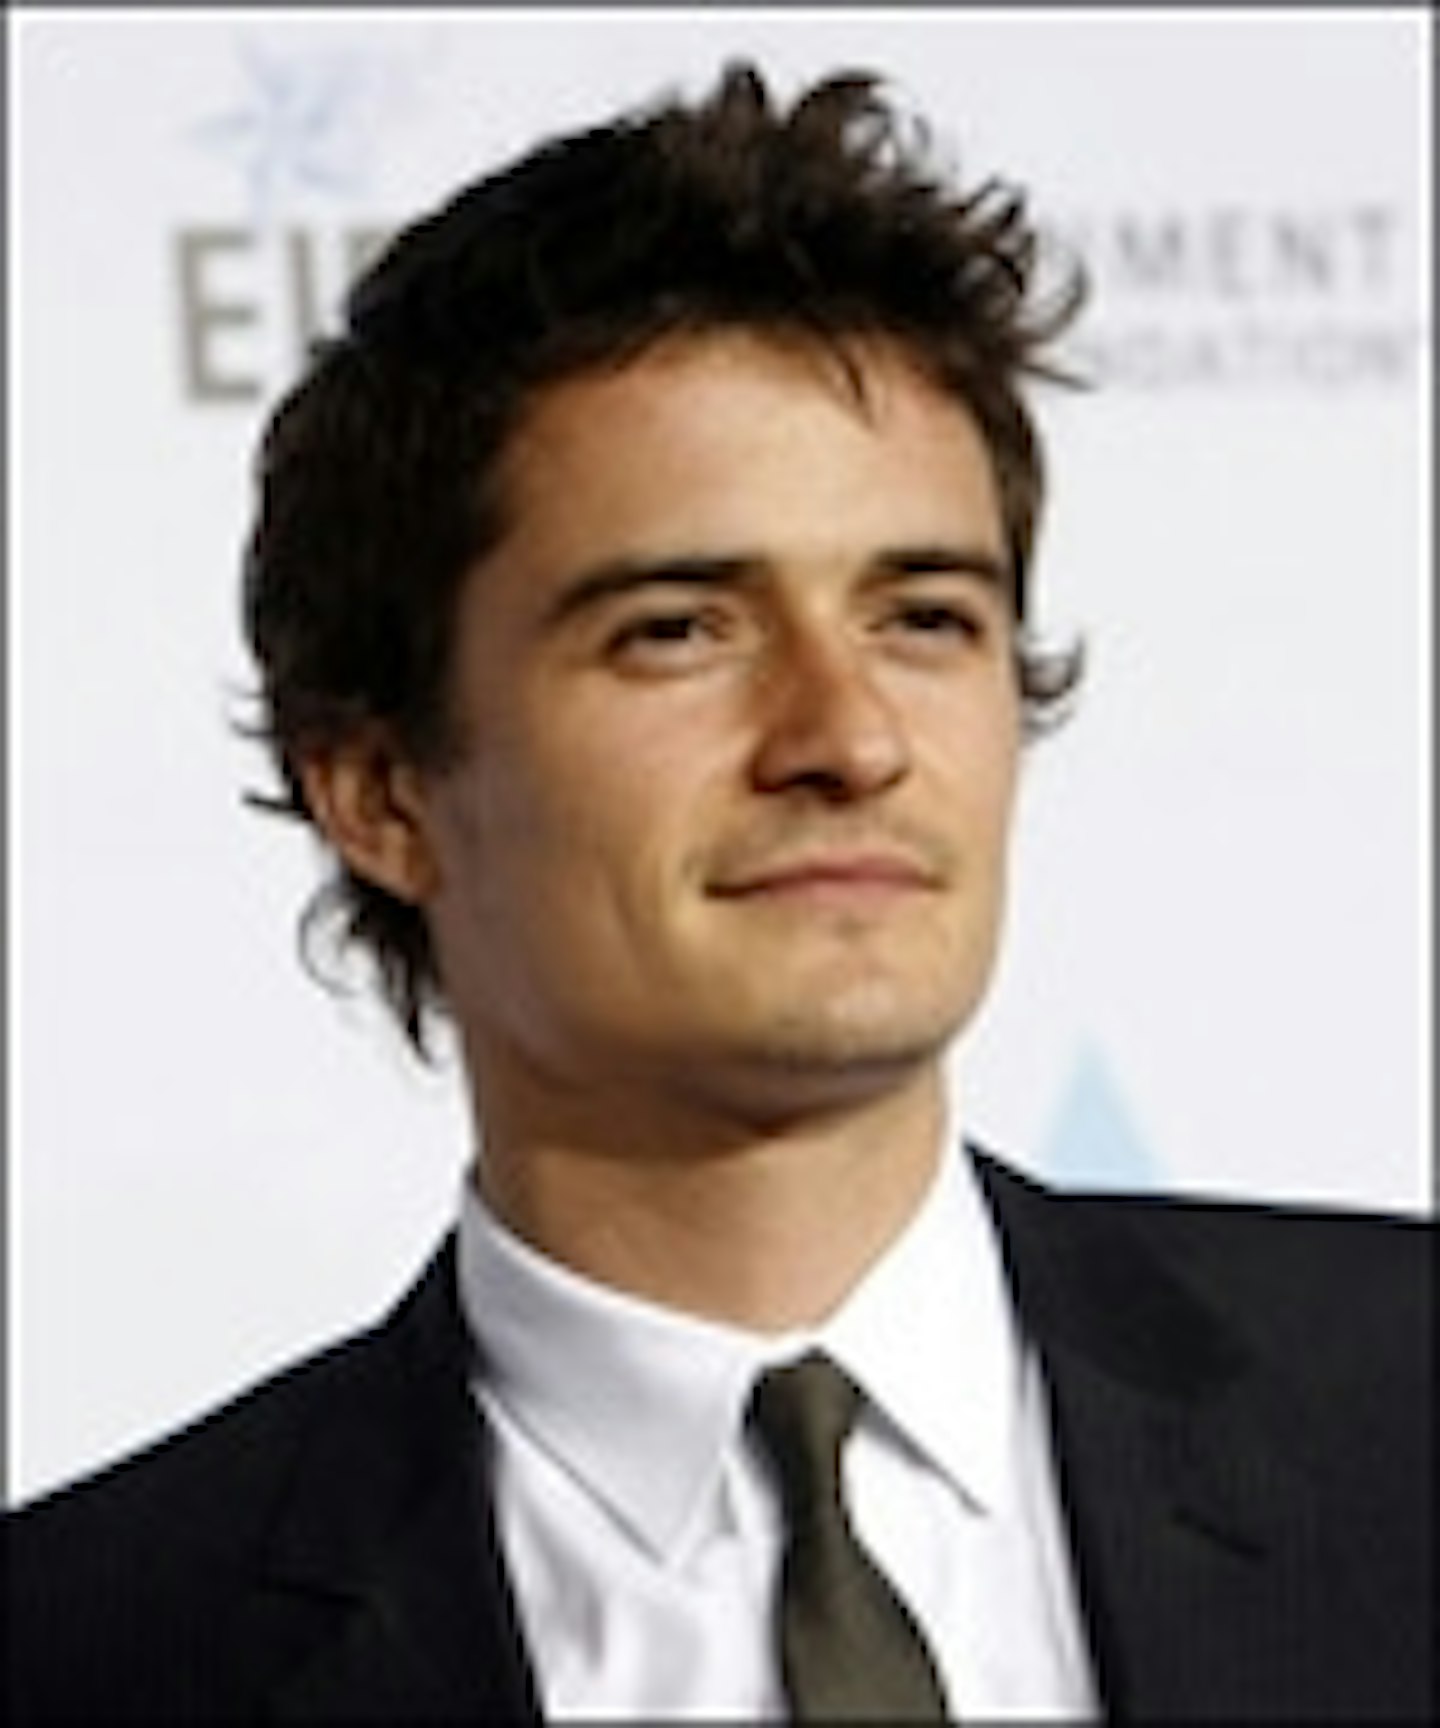 Orlando Bloom Confirmed For Pirates Of The Caribbean 5